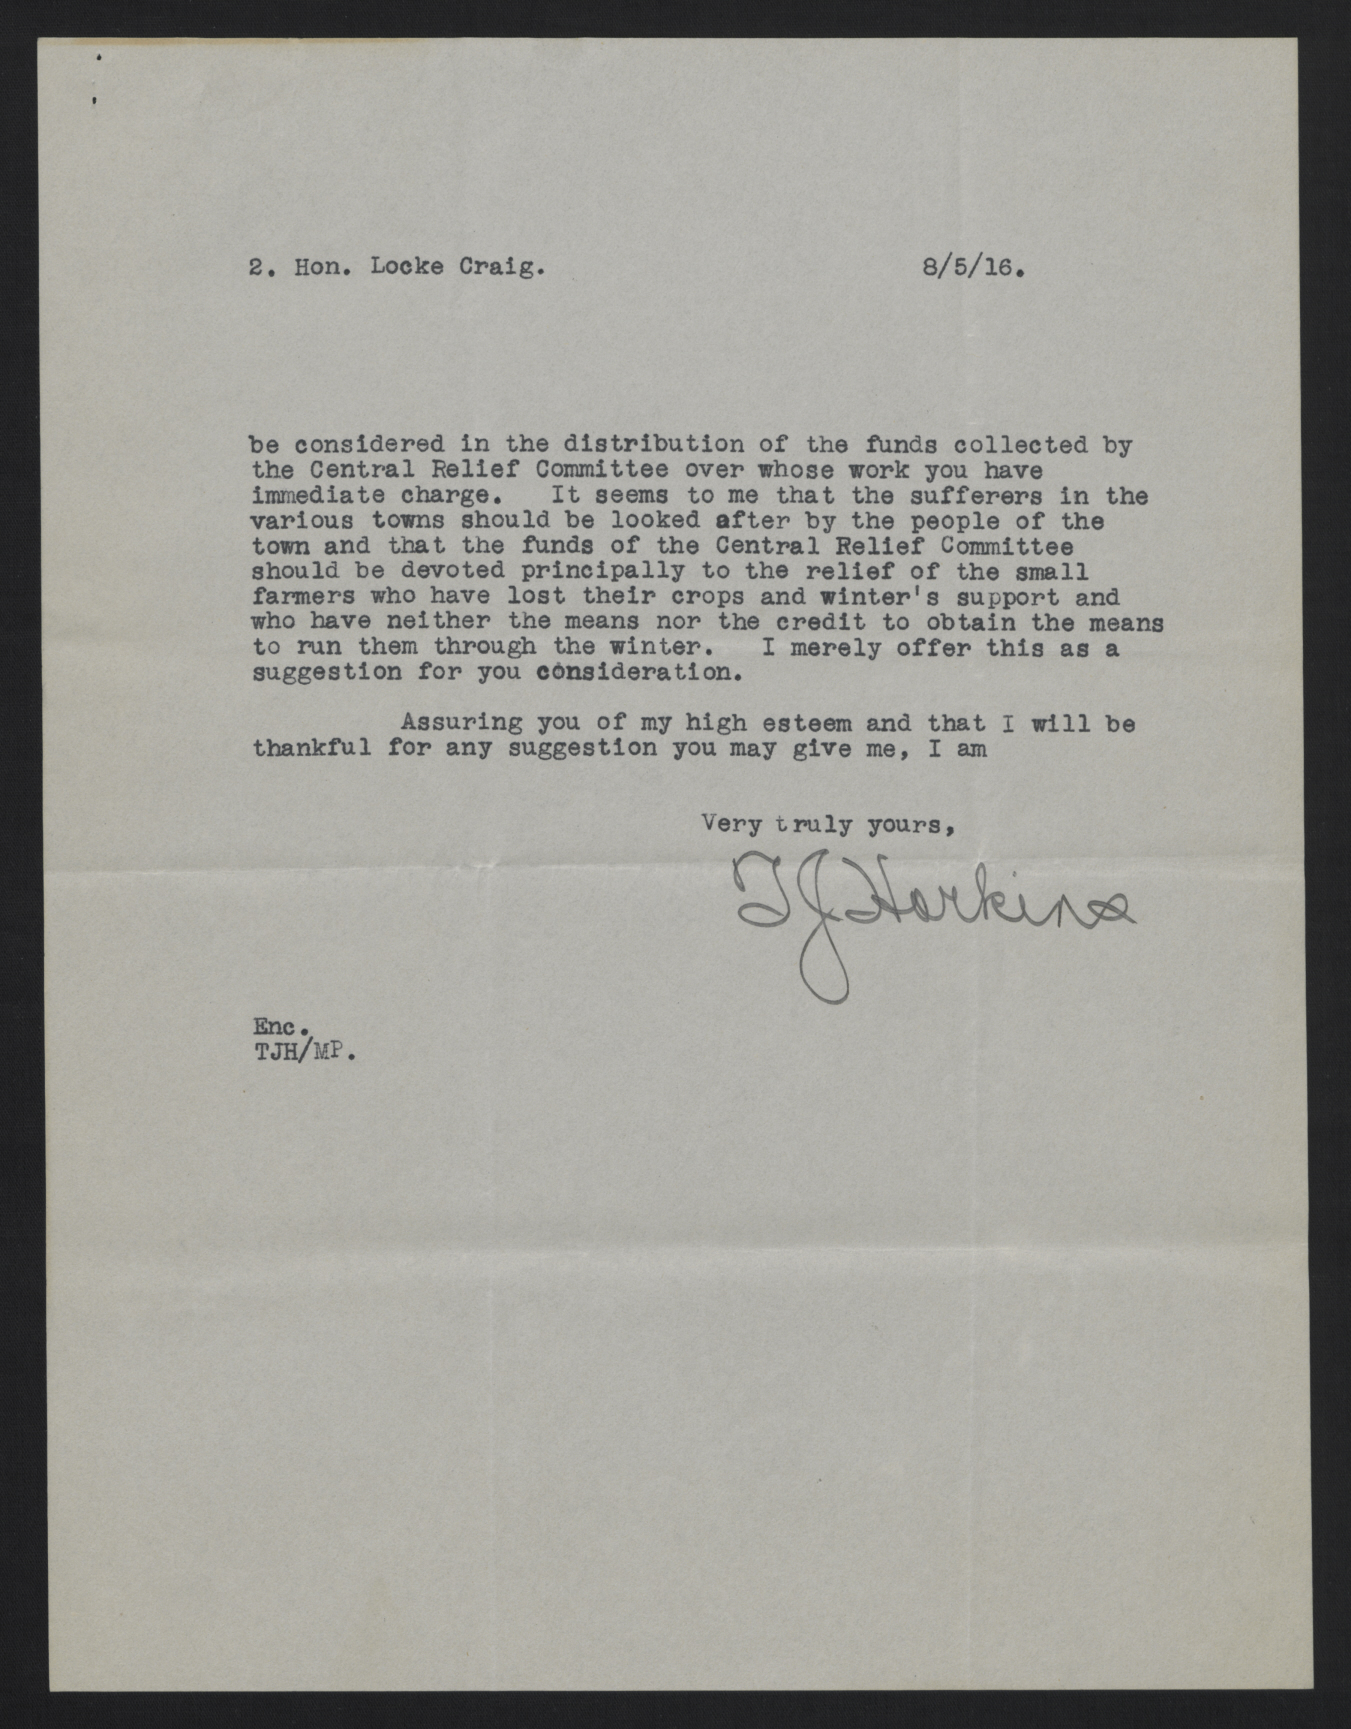 Letter from Harkins to Craig, August 5, 1916, page 2